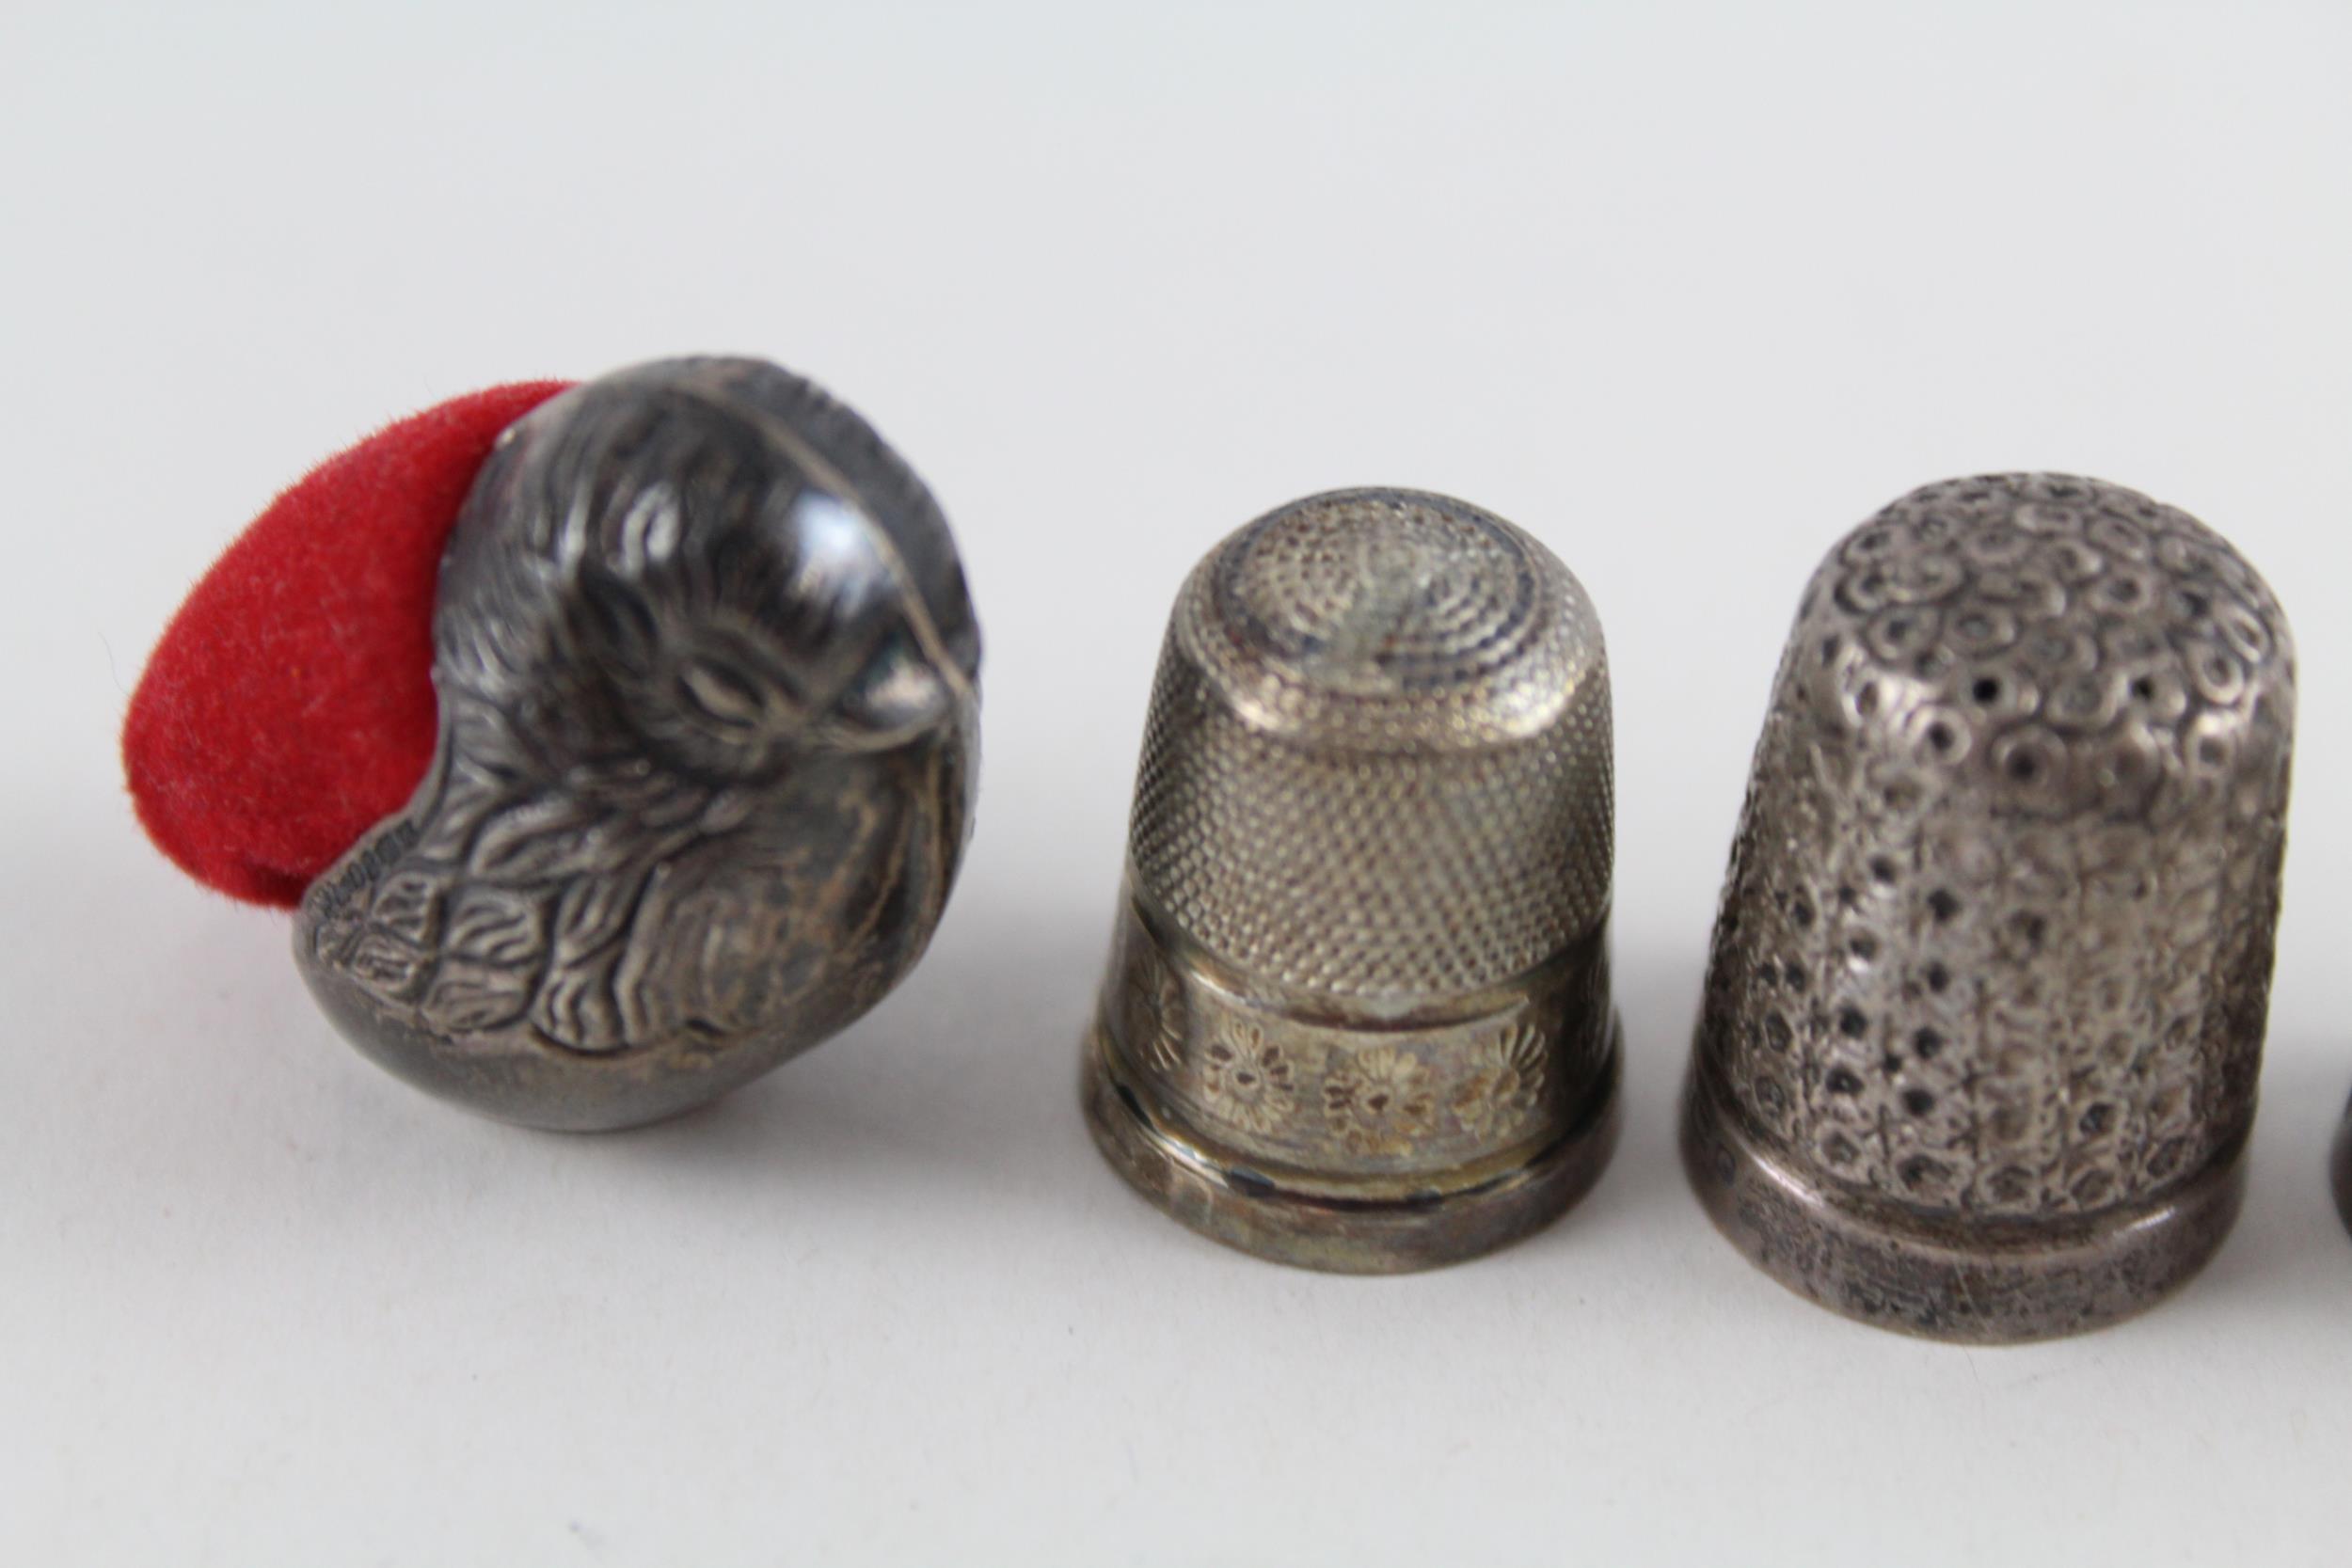 6 x Antique / Vintage .925 Sterling Silver Novelty Pin Cushion & Thimbles (27g) // In antique / - Image 2 of 4